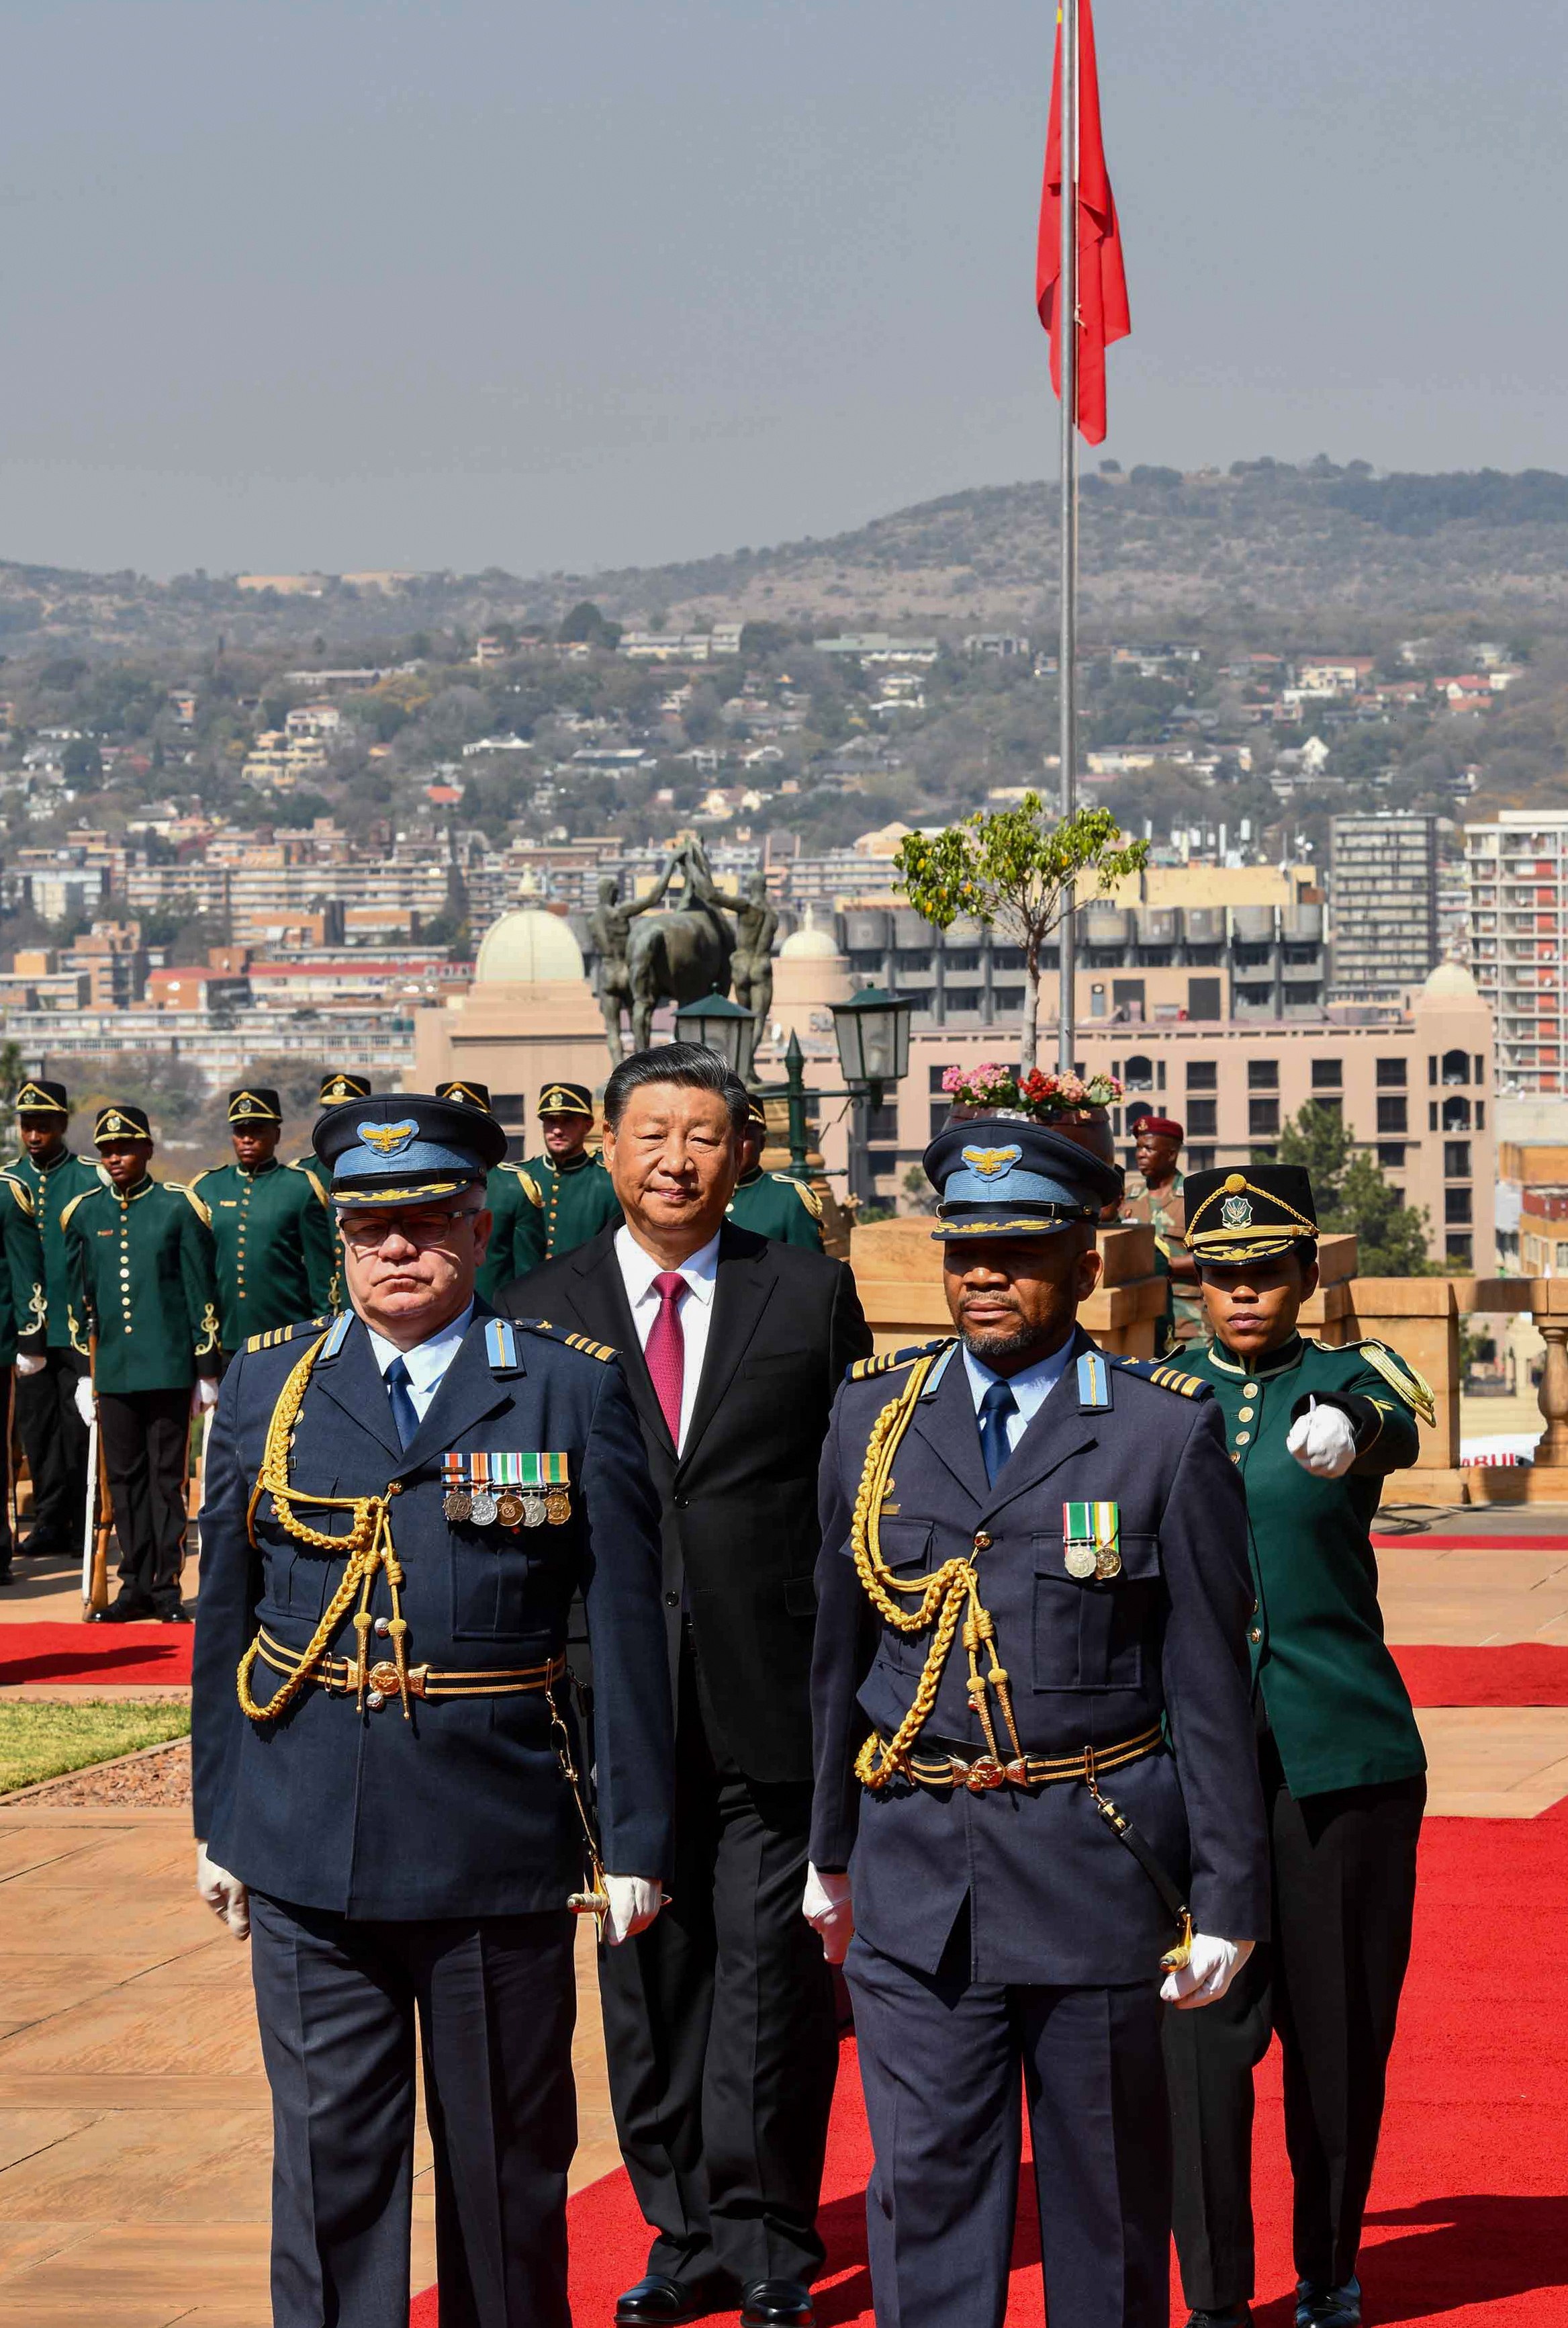 Chinese President Xi Jinping arrives at the Union Buildings in Pretoria, South Africa, on Tuesday. Photo: China’s Government Information Service via EPA-EFE